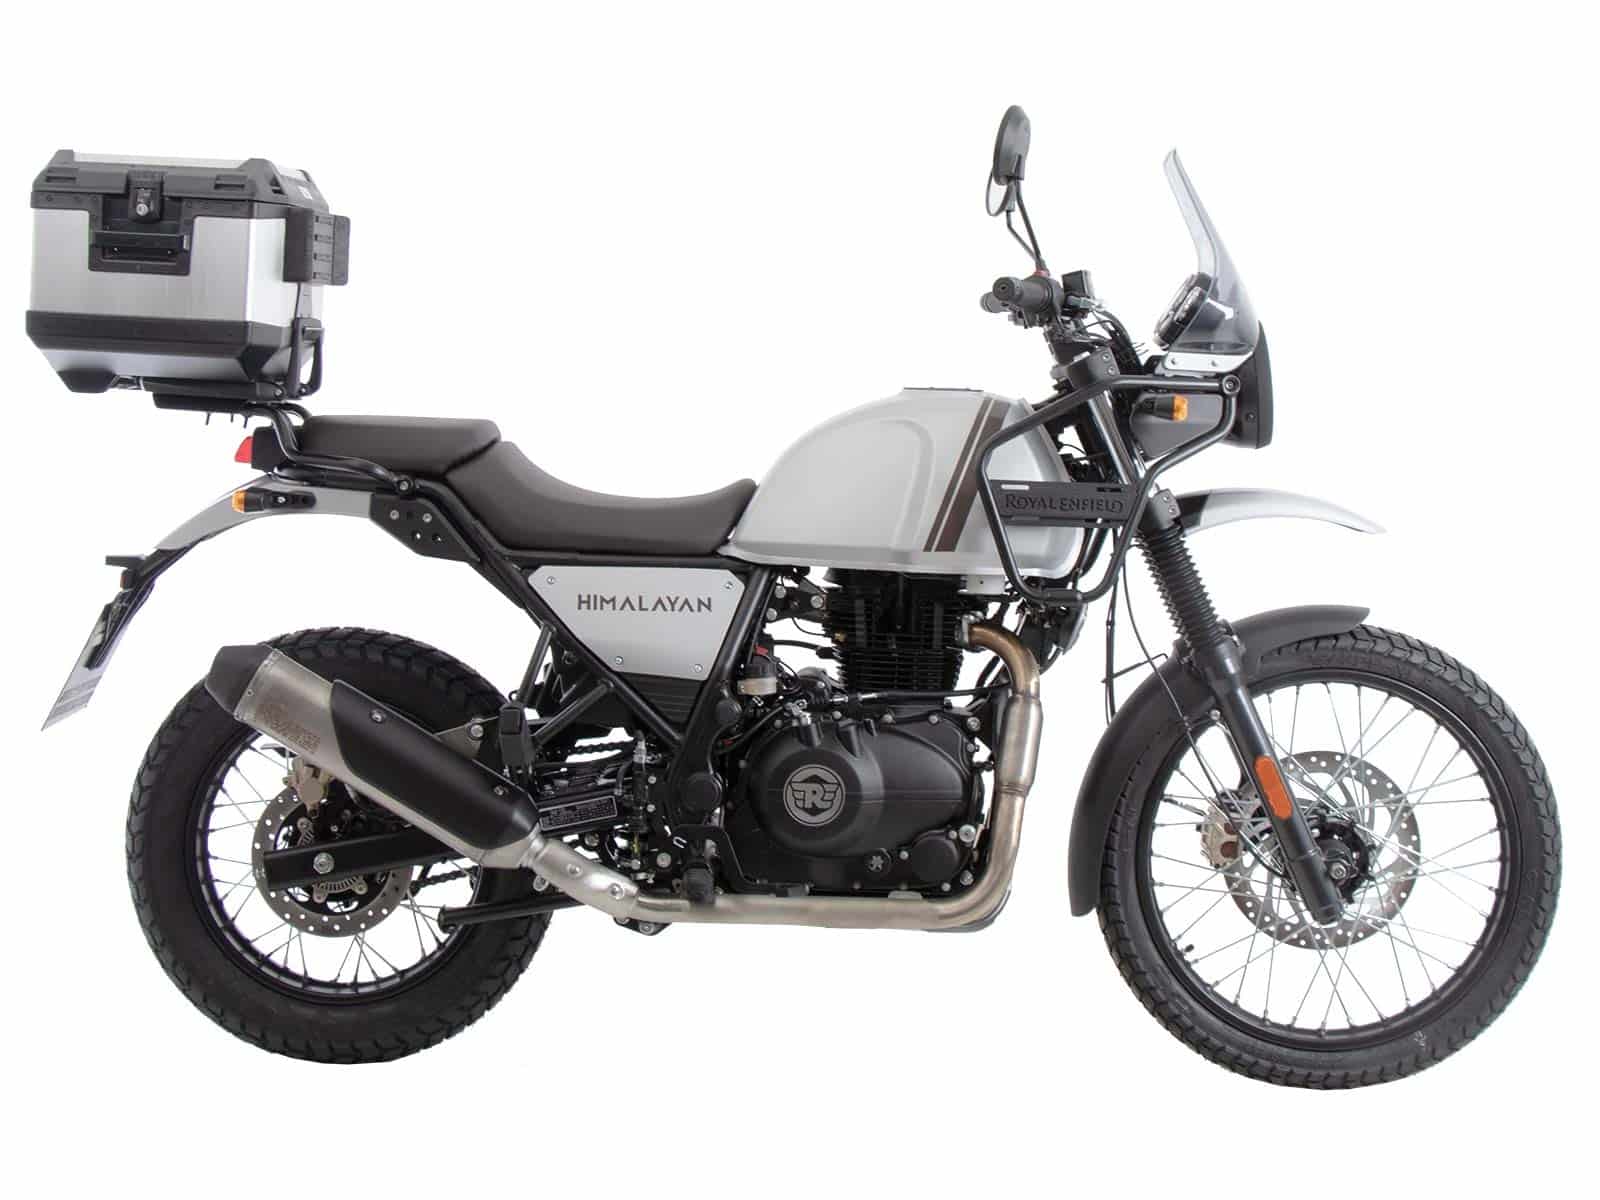 Alurack top case carrier black for combination with original rear rack for Royal Enfield Himalayan (2021-)